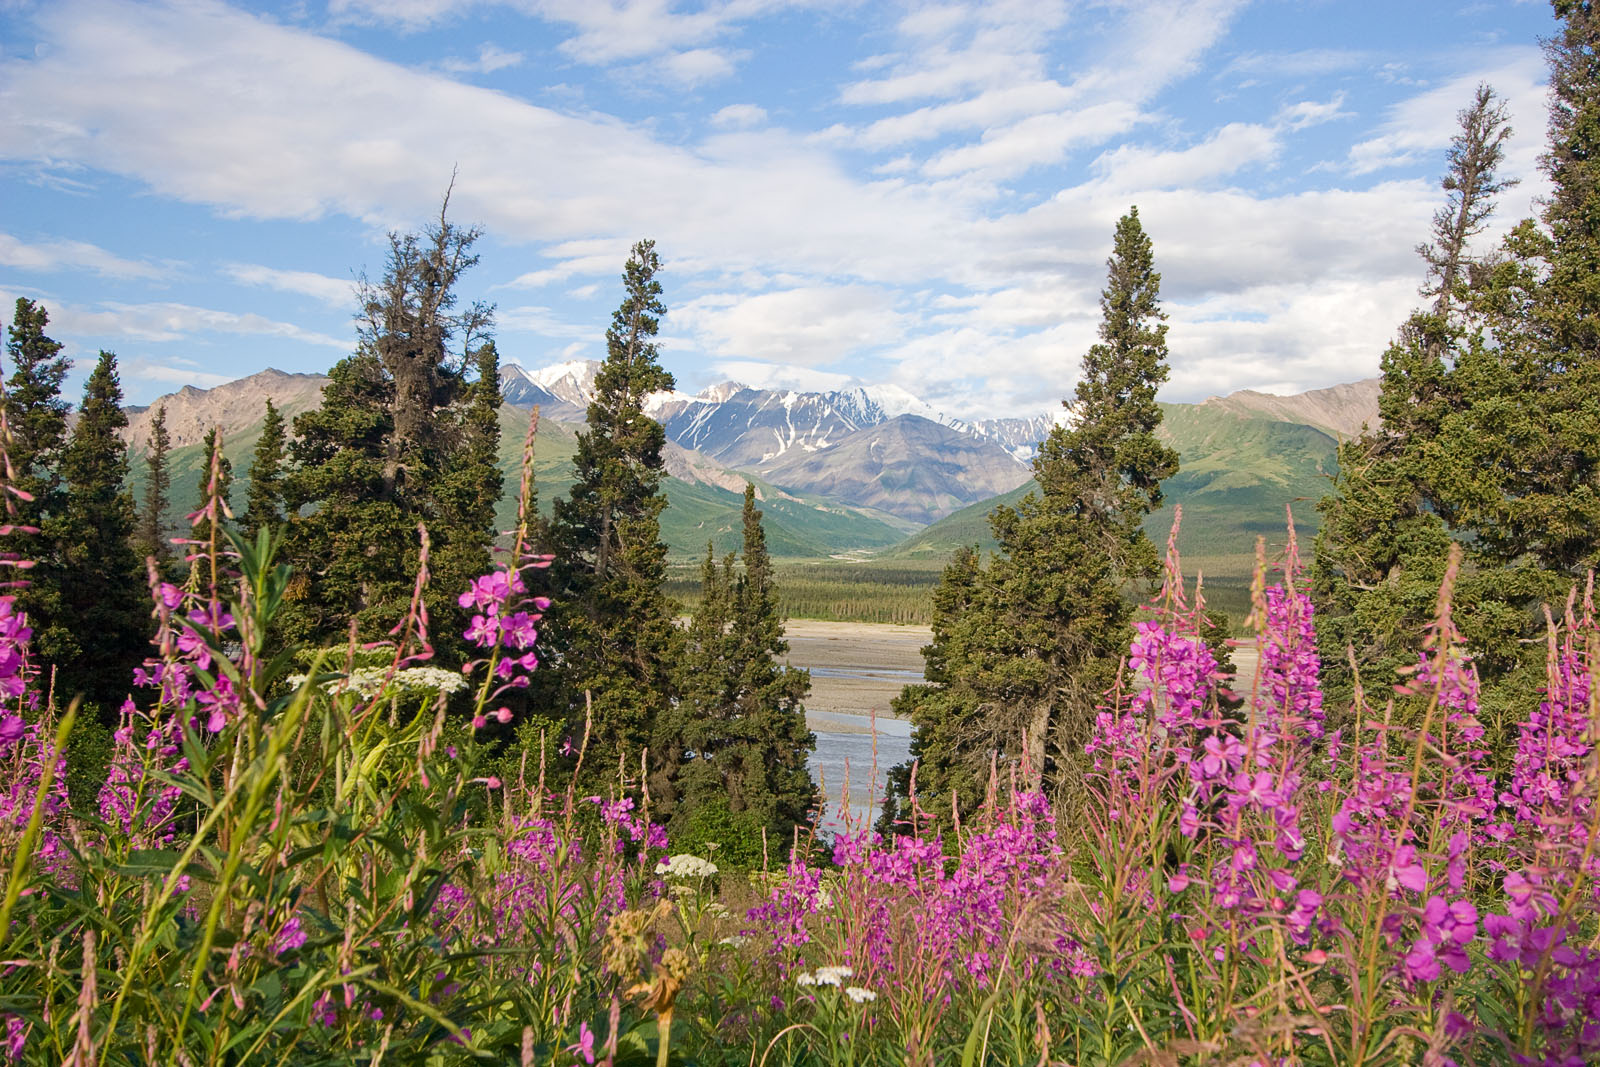 The Fireweed here grows thick along many roadsides in Alaska, including the Richardson Highway here with a view of the glacial Delta River and the Alaska Range. From the Delta River in Alaska.